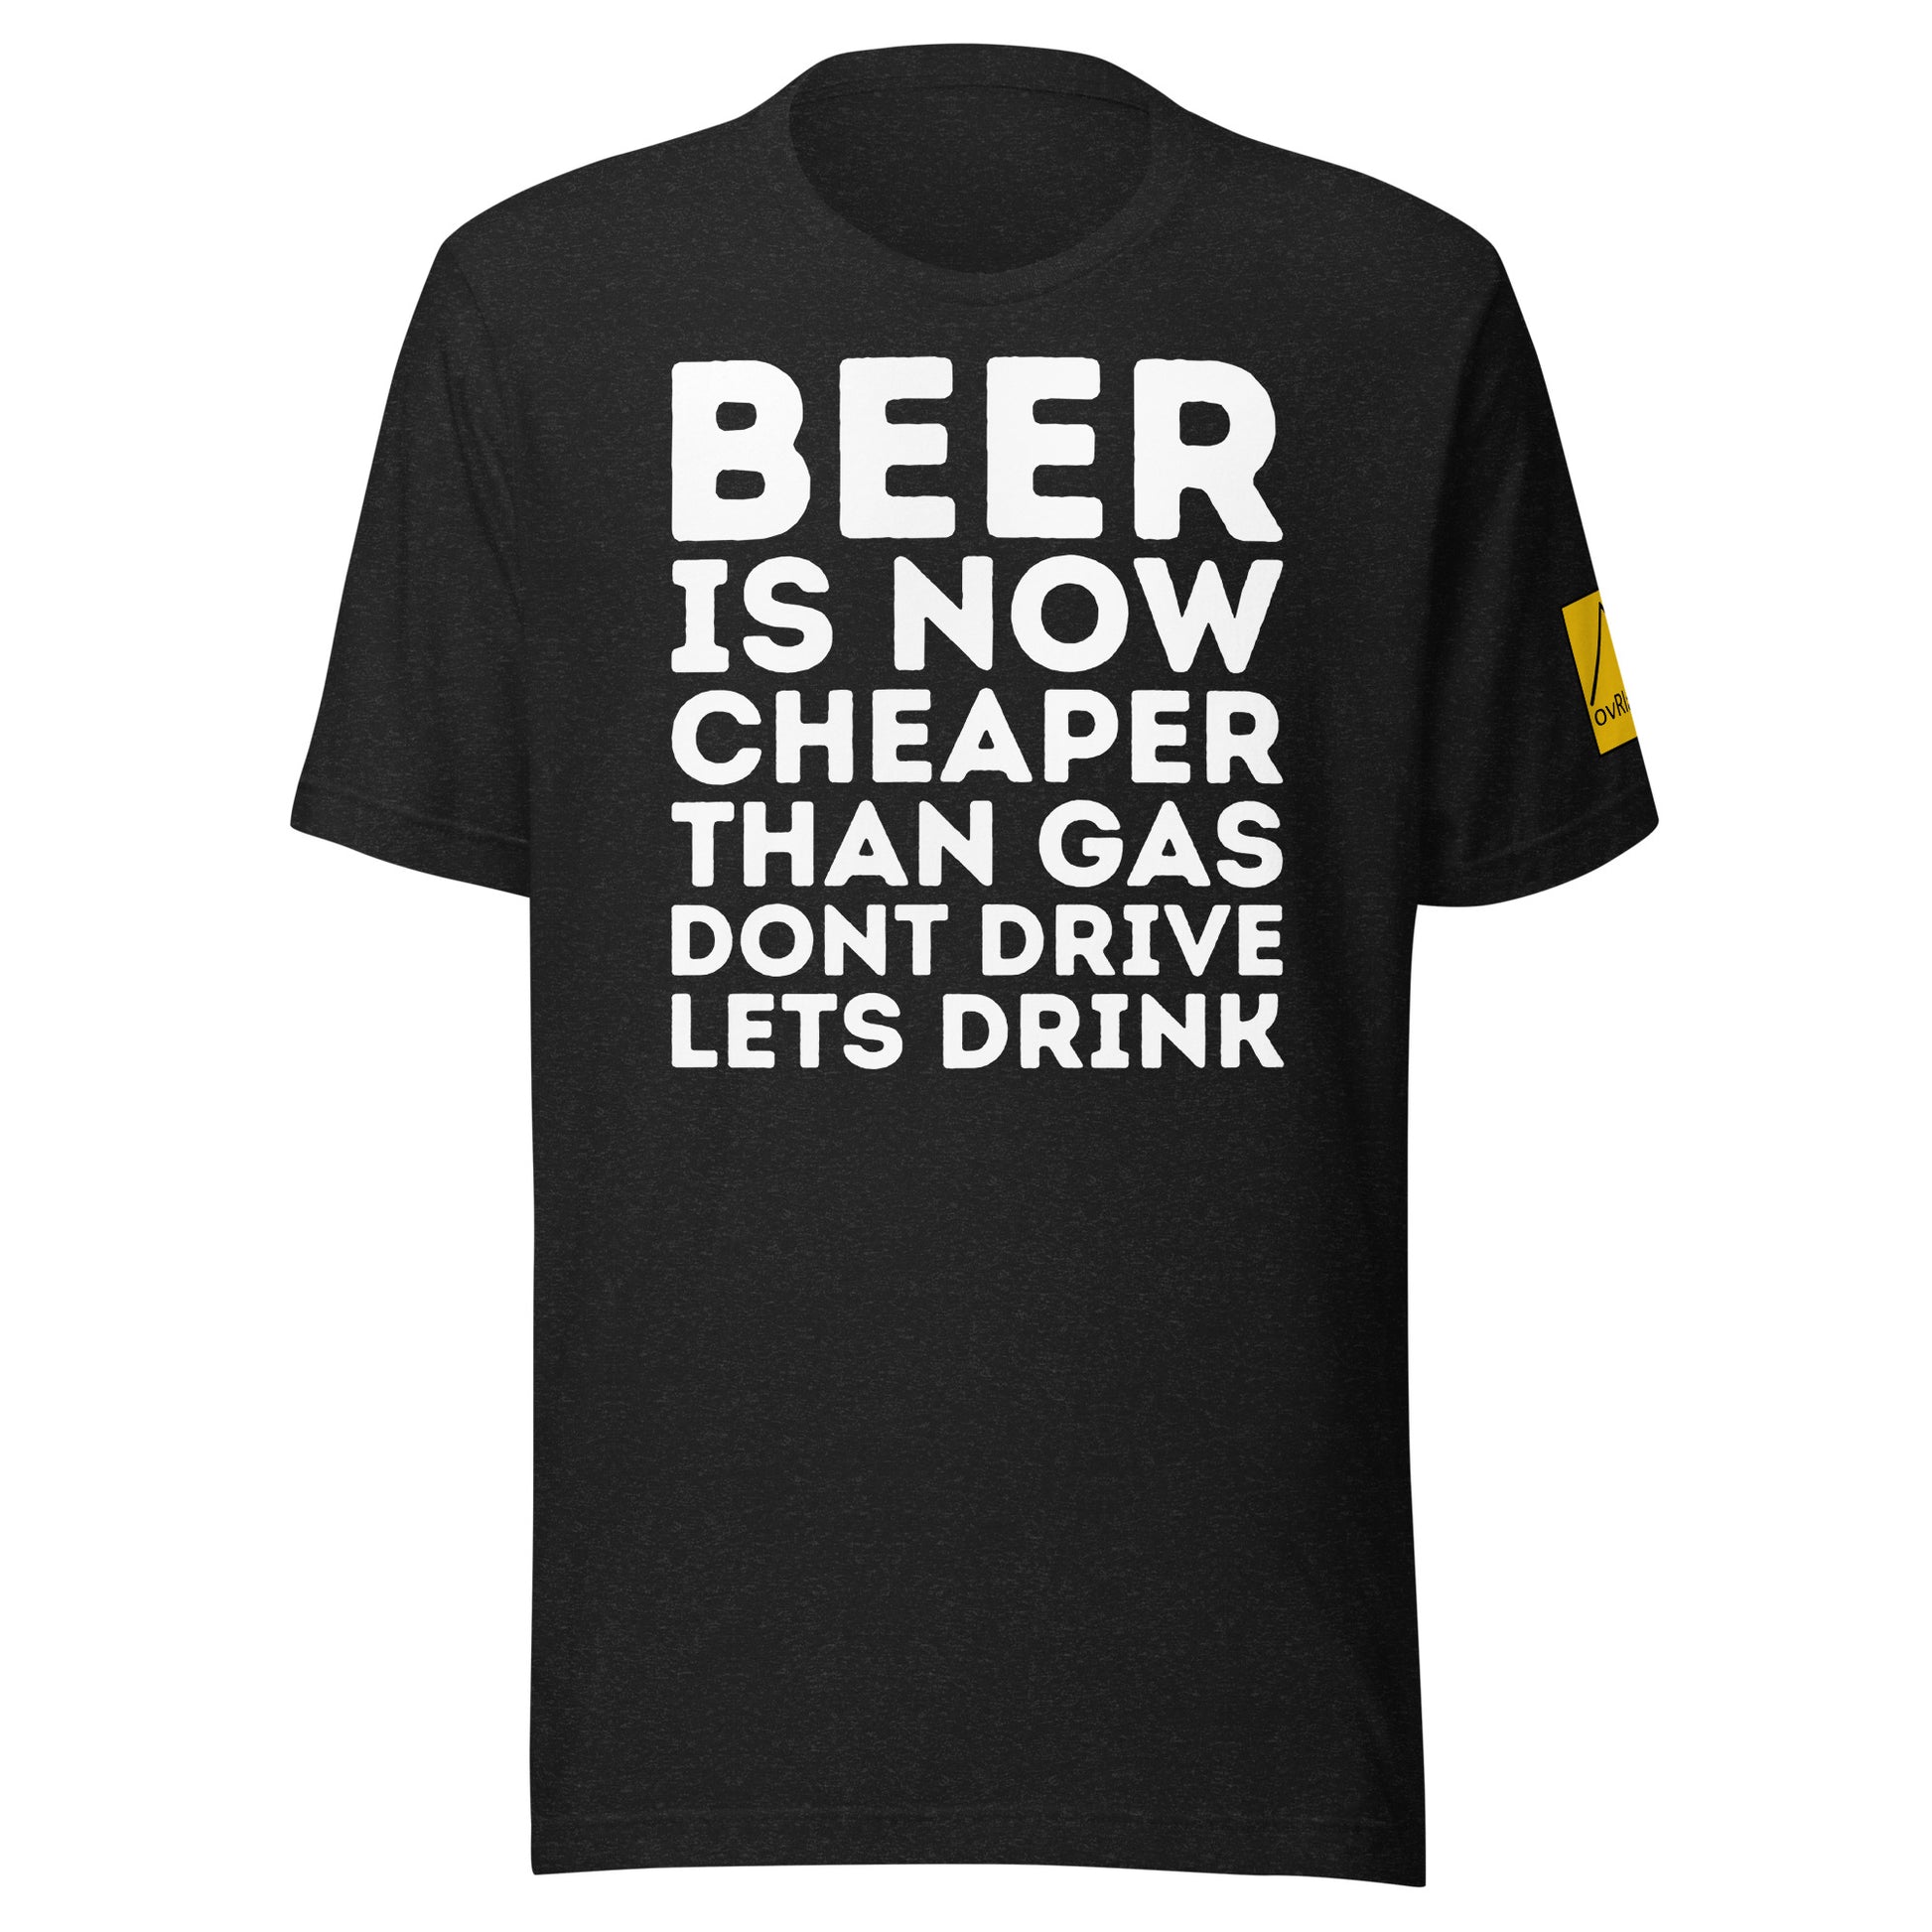 "BEER IS NOW CHEAPER THAN GAS. DONT DRIVE. LETS DRINK."  Black T-shirt. overland365.com